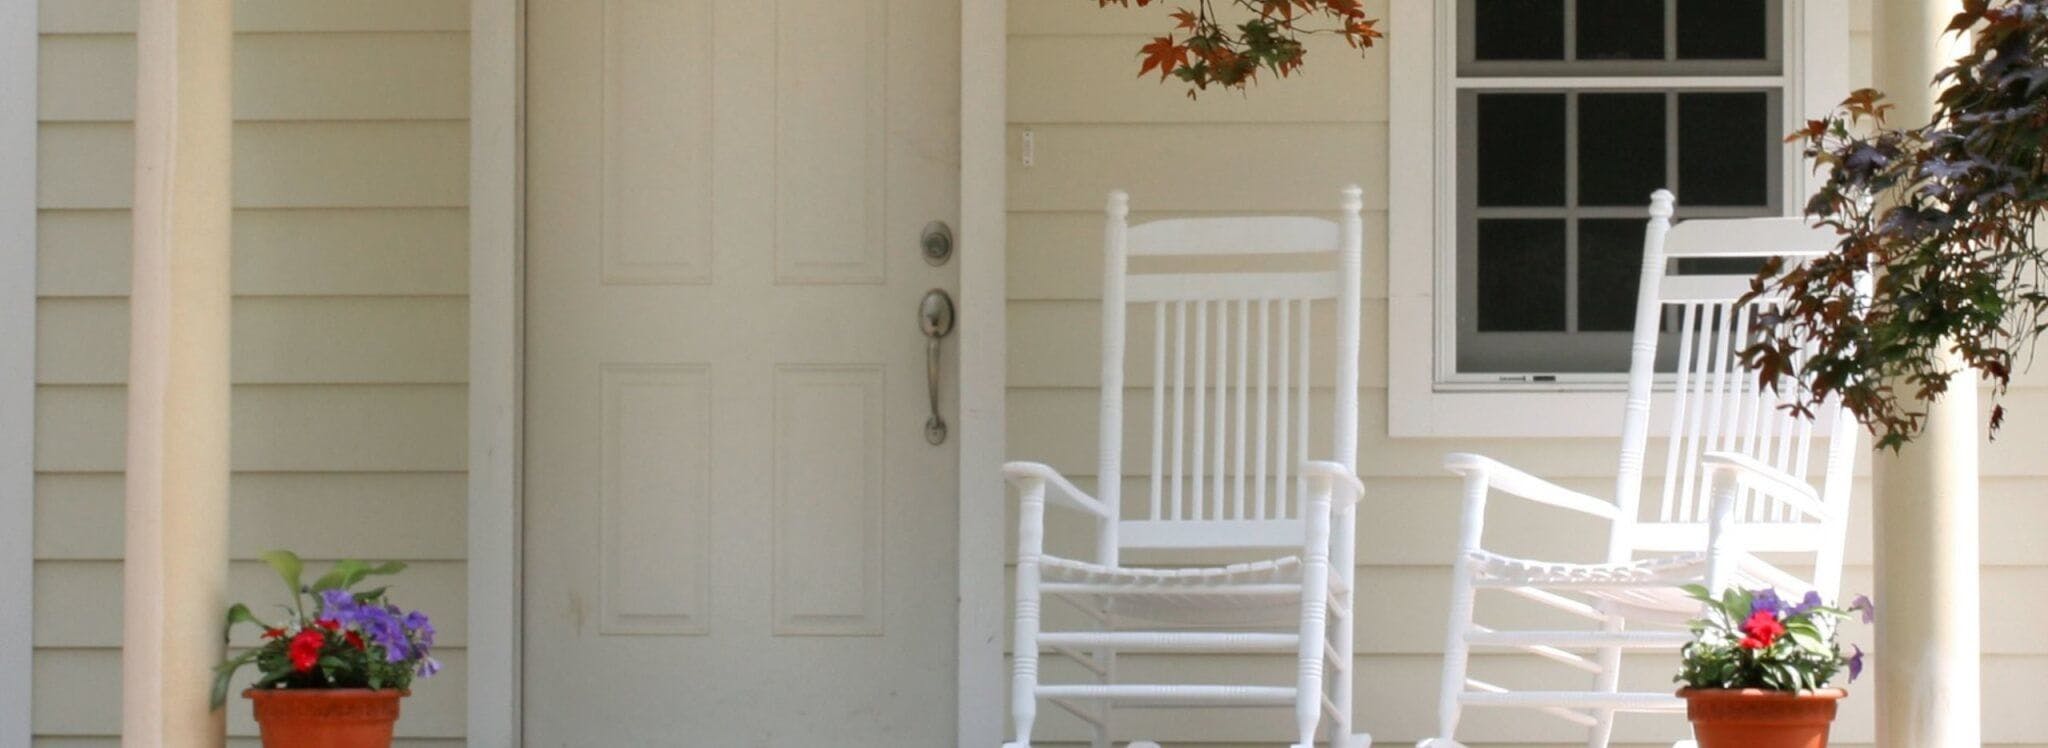 Rocking chairs on a front porch